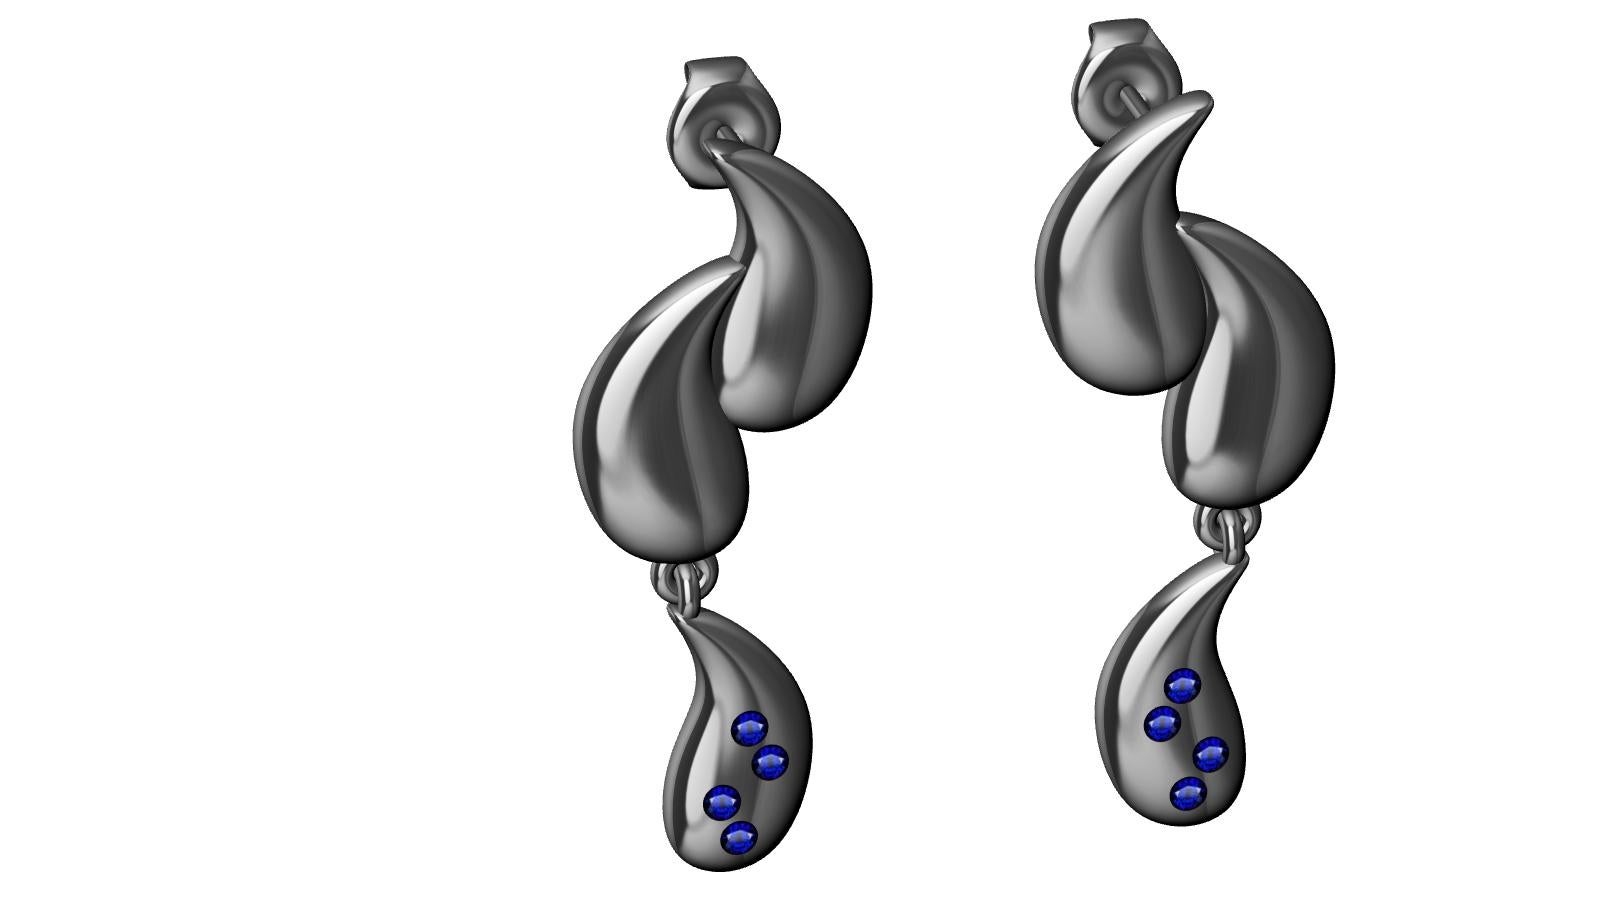 18 Karat White Gold and Sapphires Curve Dangle Drop Earrings, Tiffany designer, Thomas Kurilla Welcomes the new Light , Water, Mind Collection. 2 herniated discs in 2018 , and the discovery of Cyrotherapy in 2020. This passion for the light on the